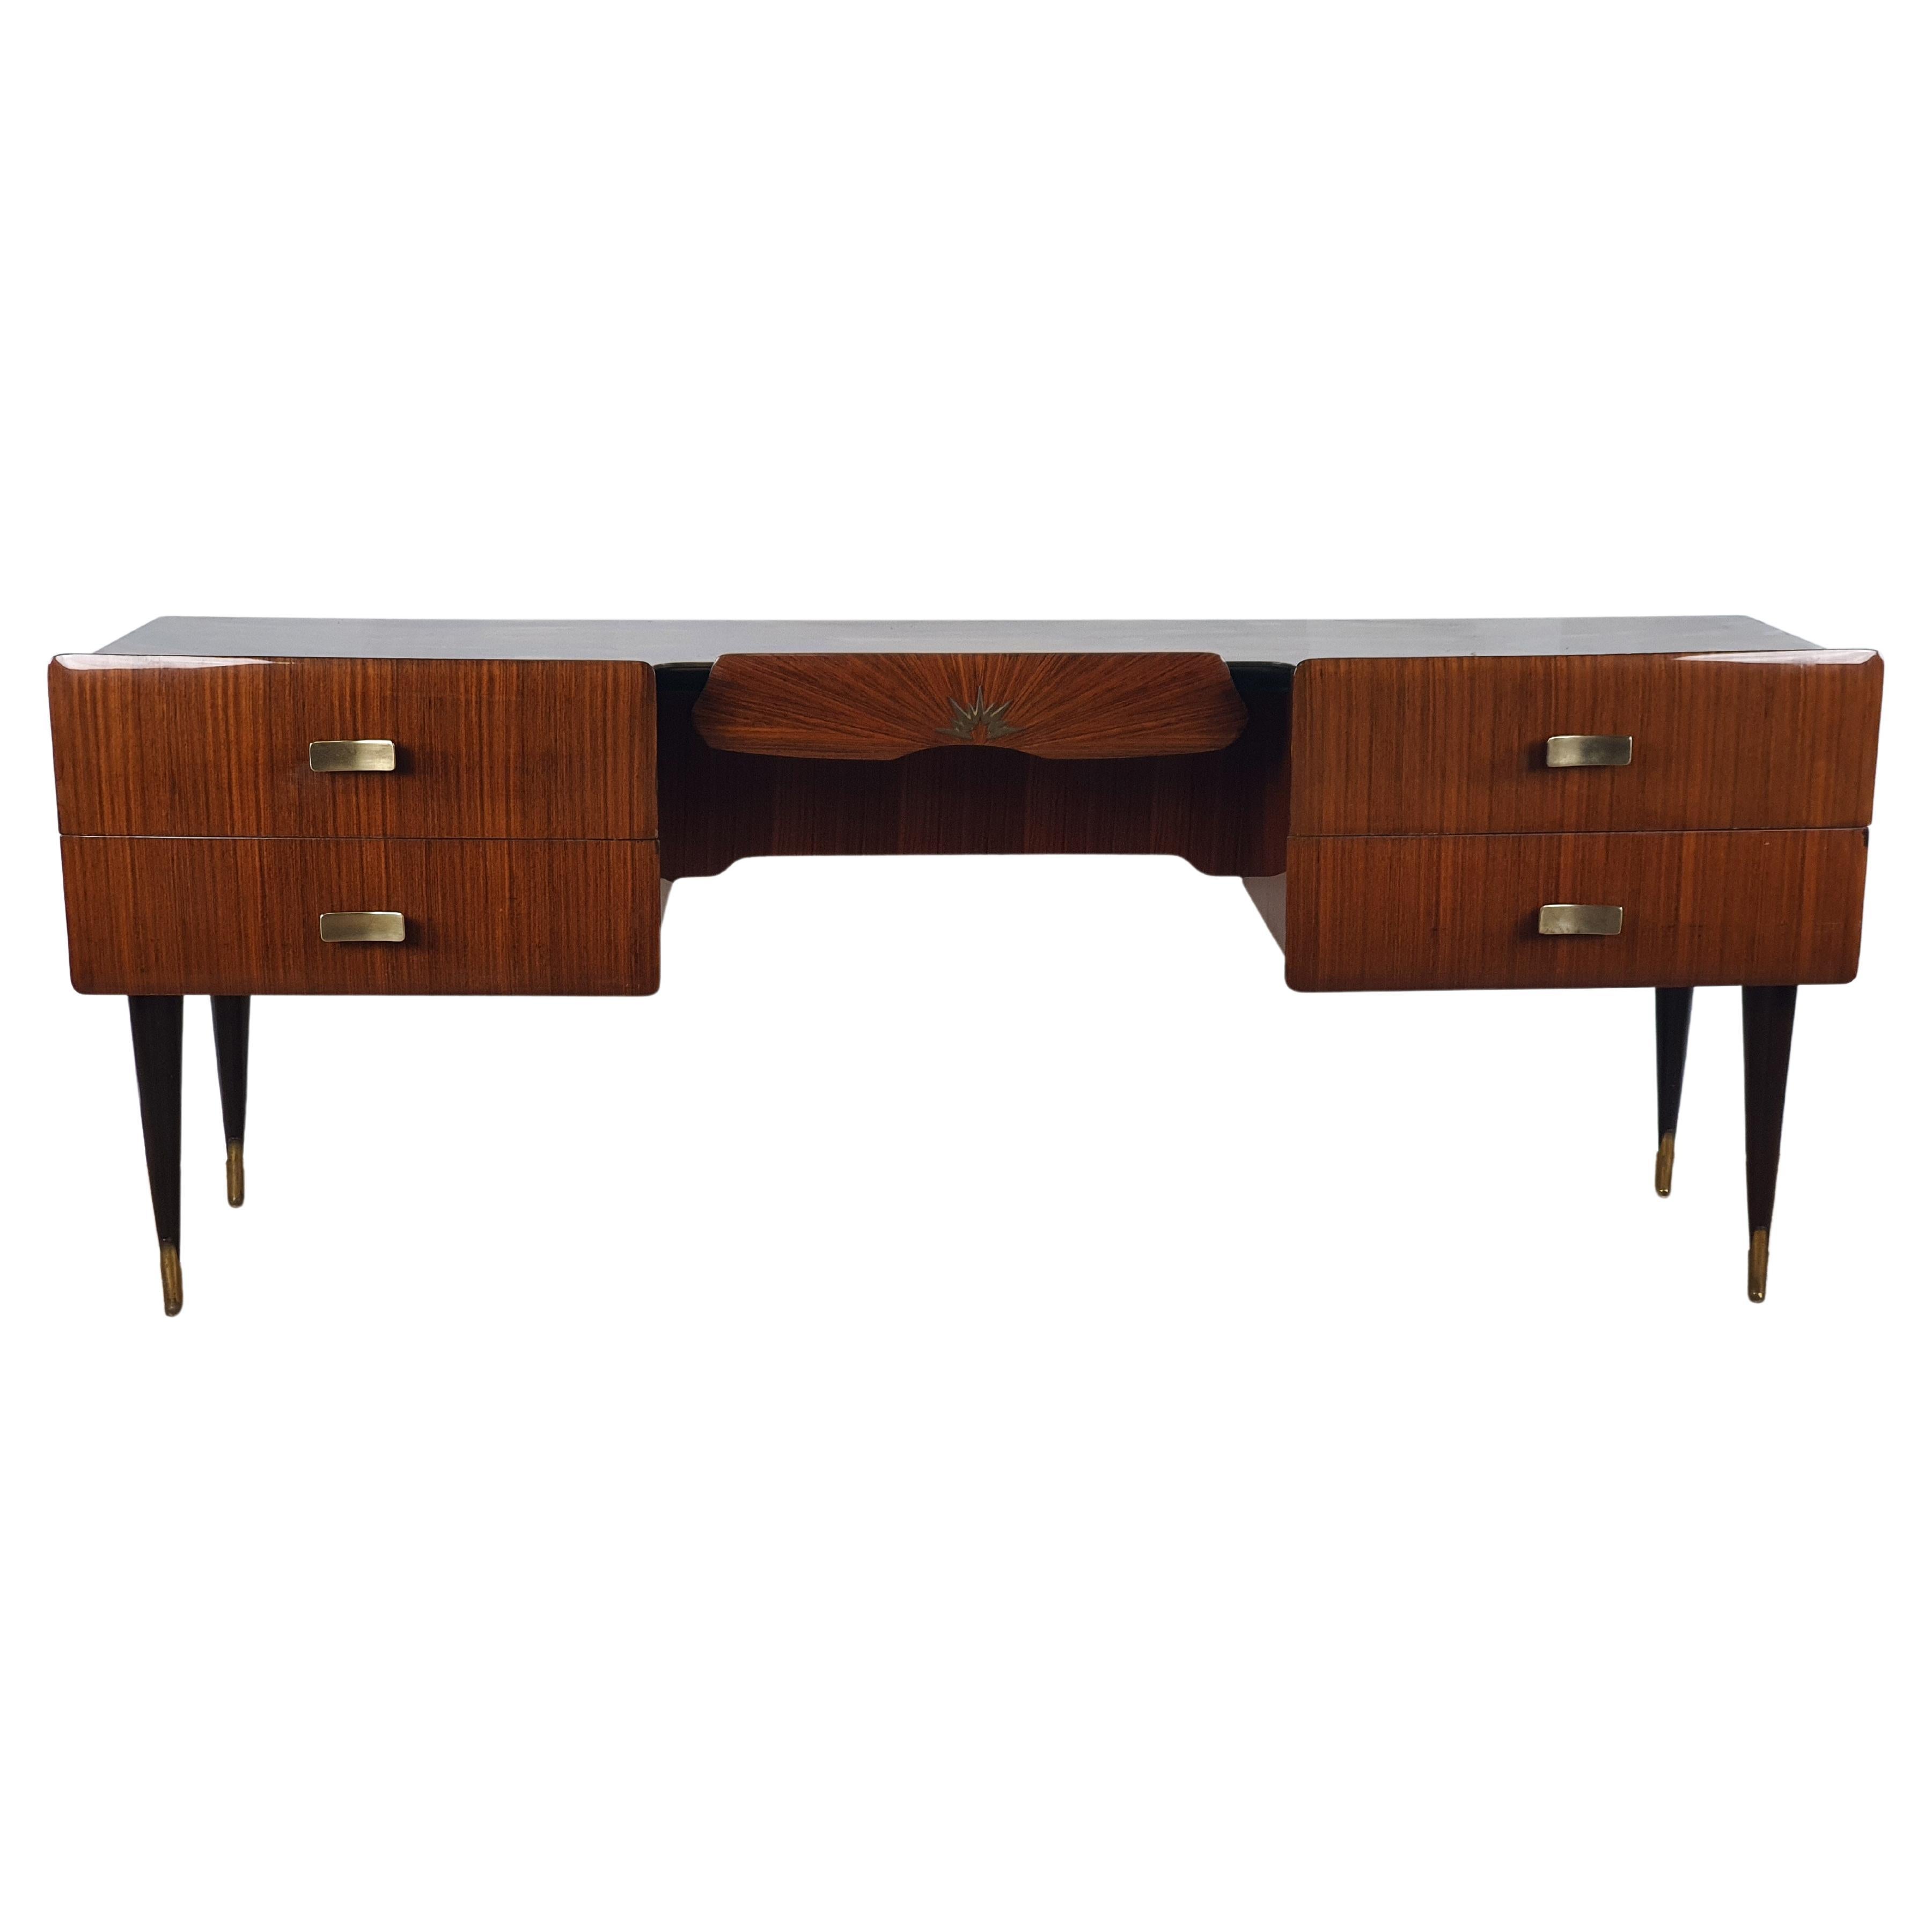 Midcentury Sideboard in Mahogany and Brass